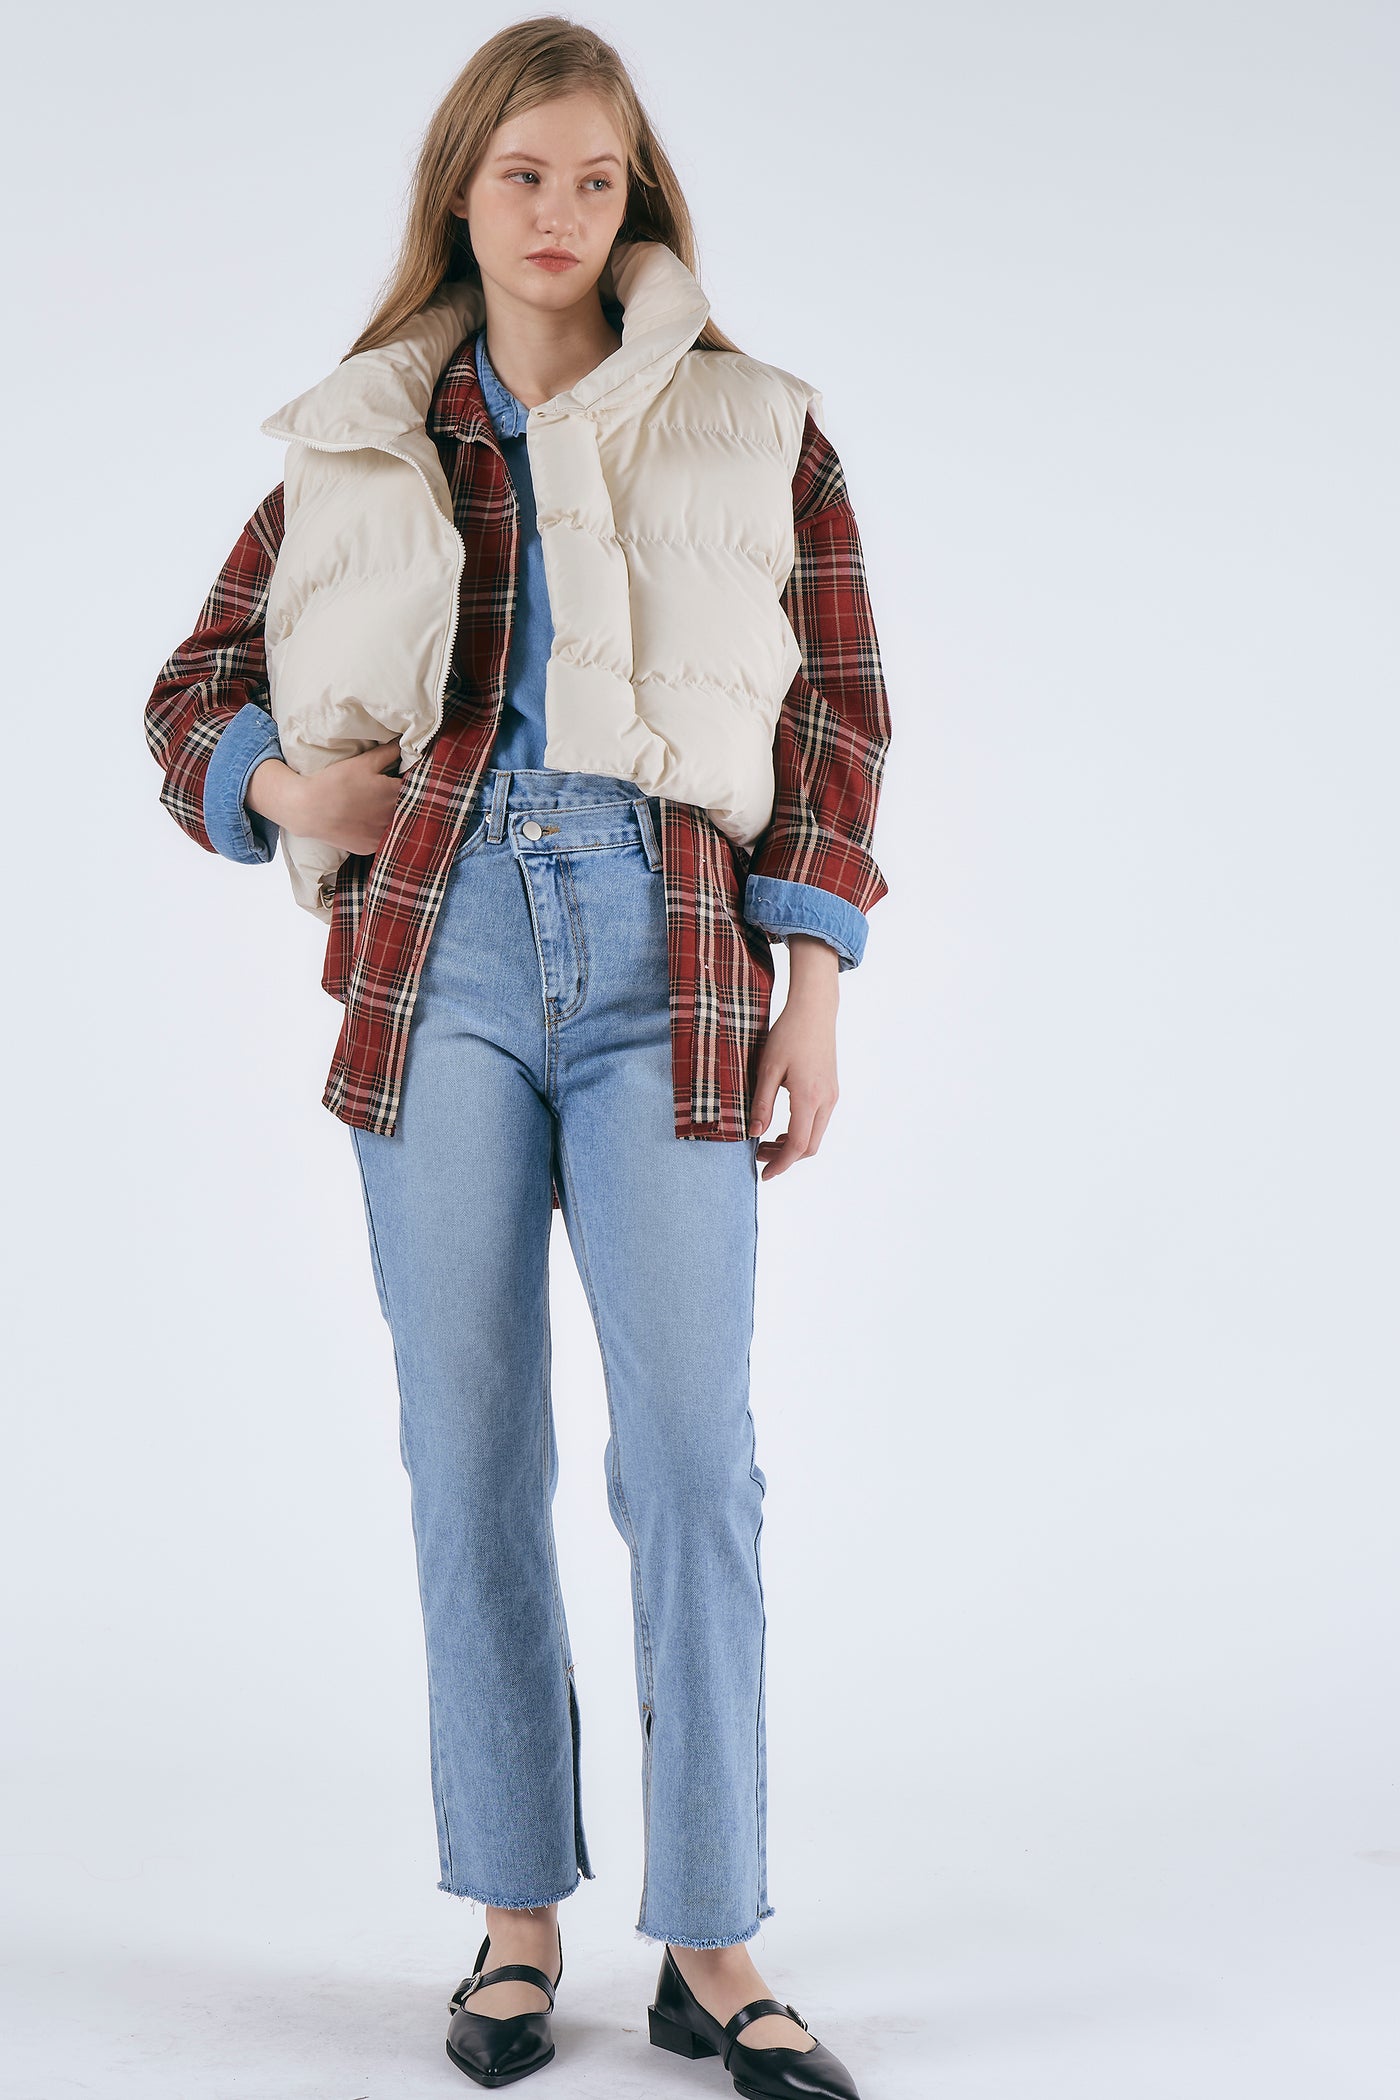 STORETS.us Phoebe Cropped Puffer Vest